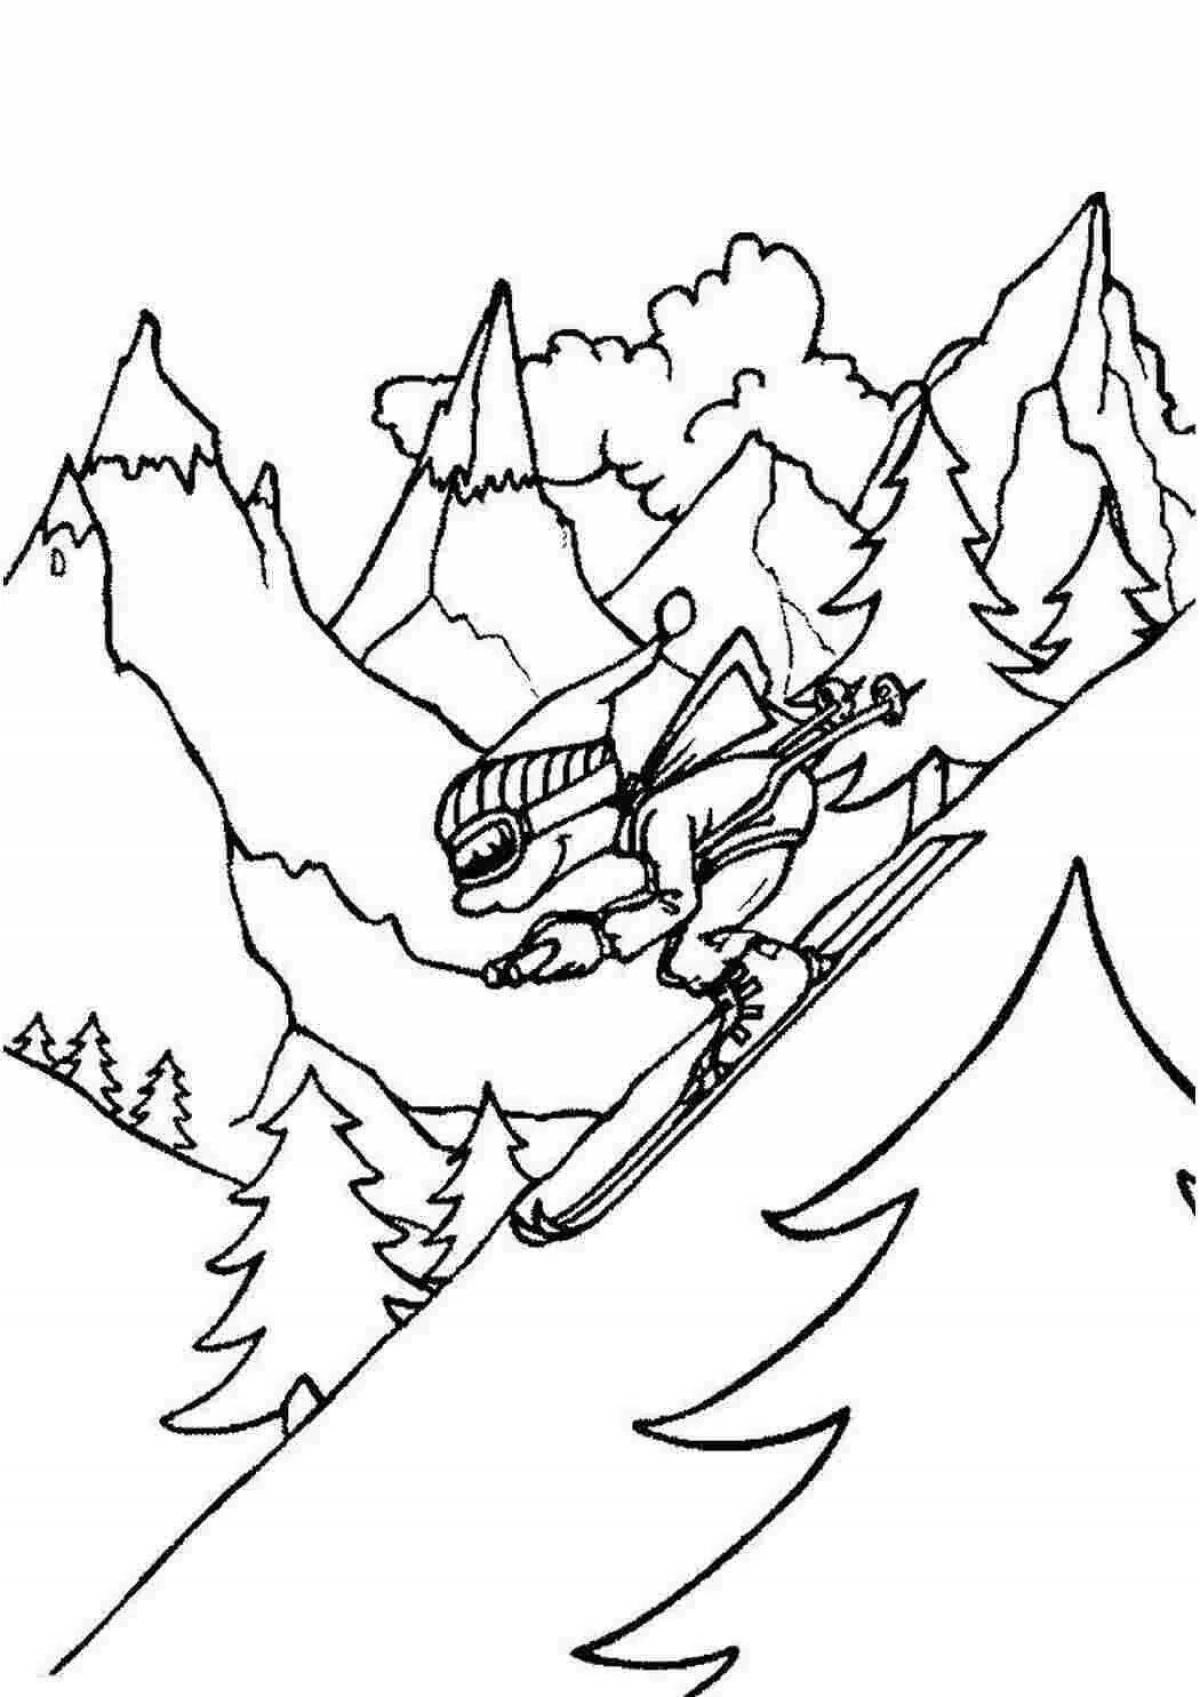 Exciting coloring book for skiing